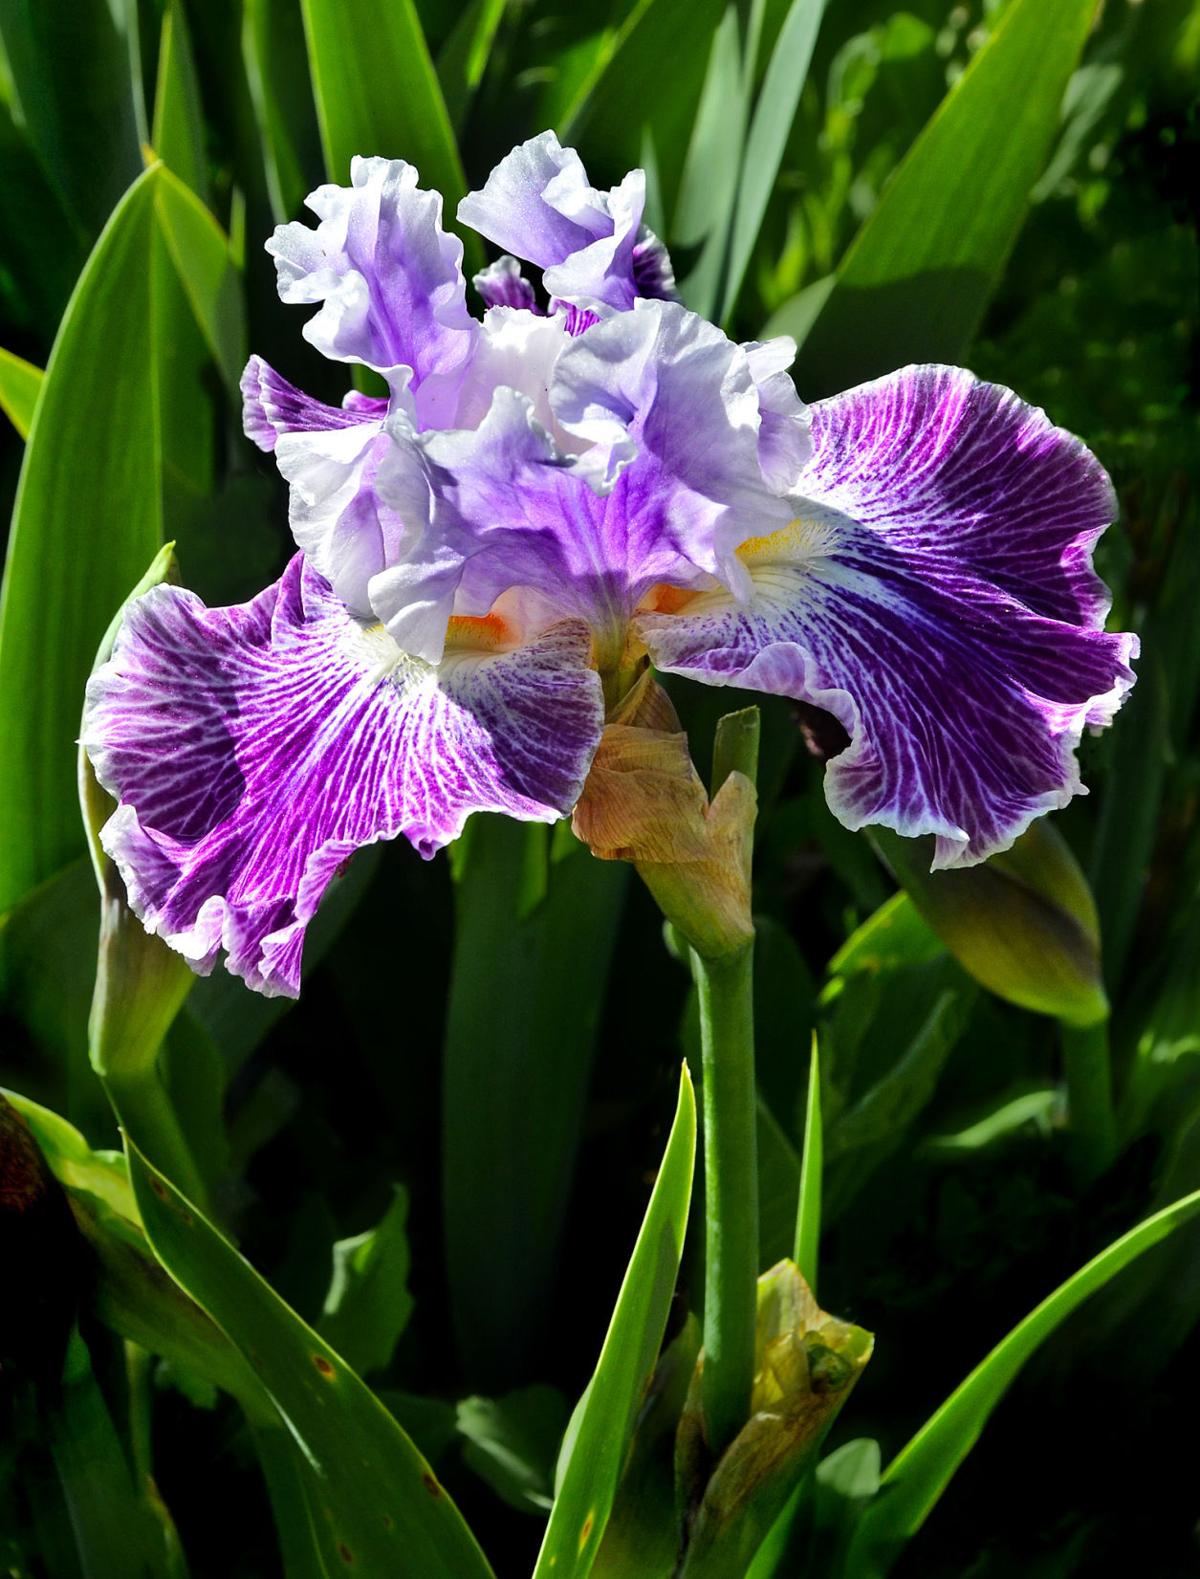 Annual Iris Show to return to Lompoc Library | Local News ...